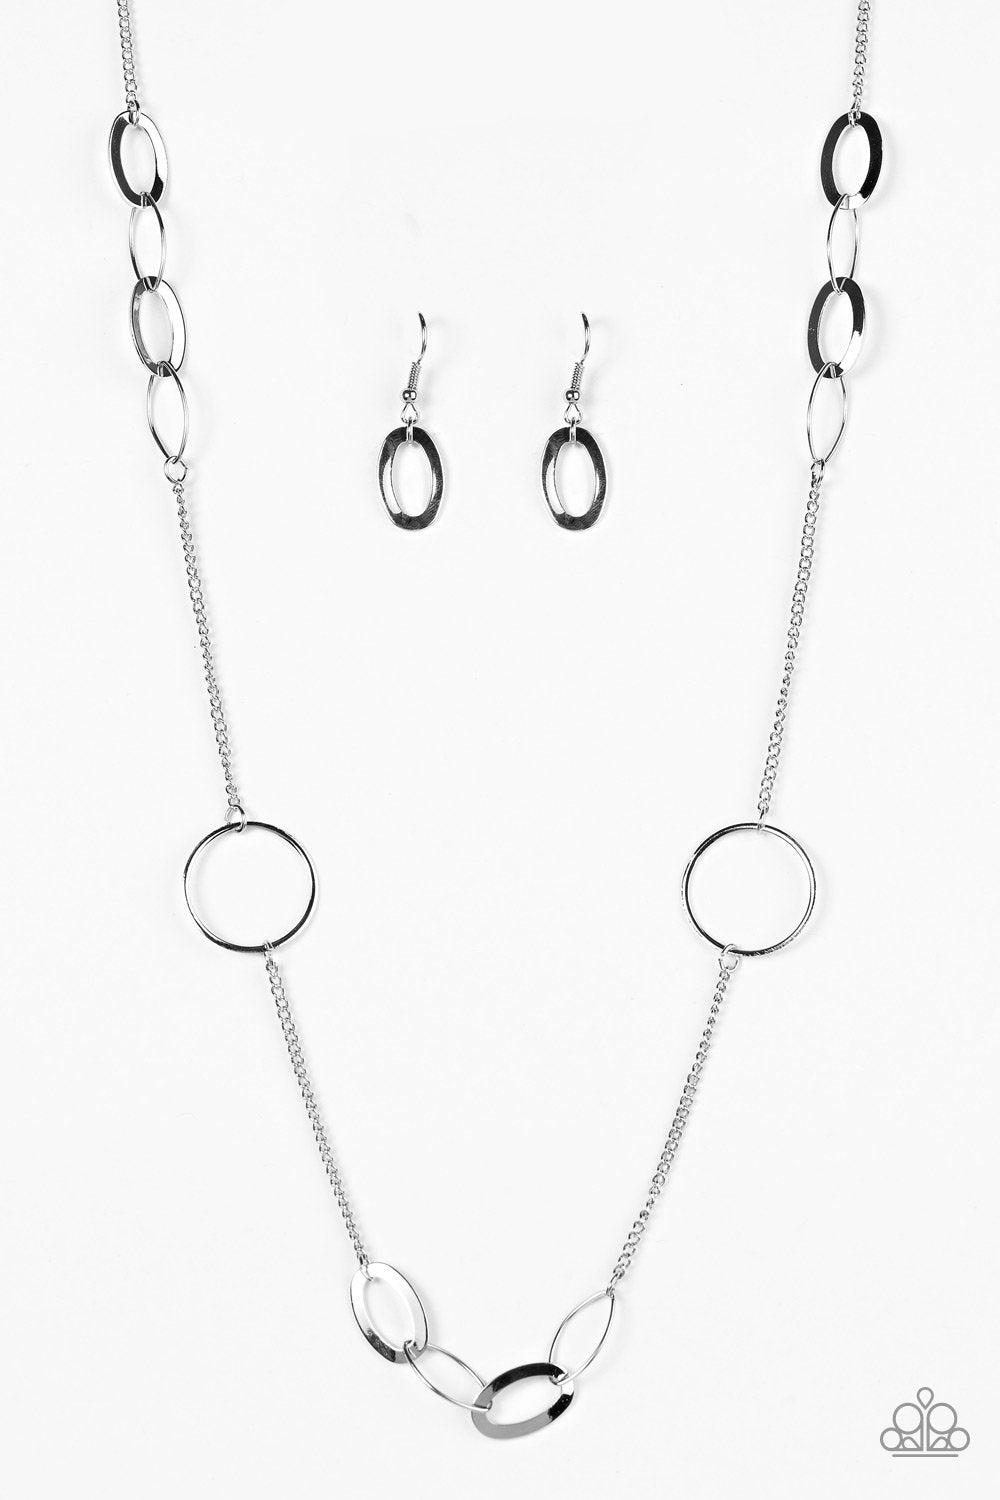 Standard Style Silver Necklace - Paparazzi Accessories-CarasShop.com - $5 Jewelry by Cara Jewels